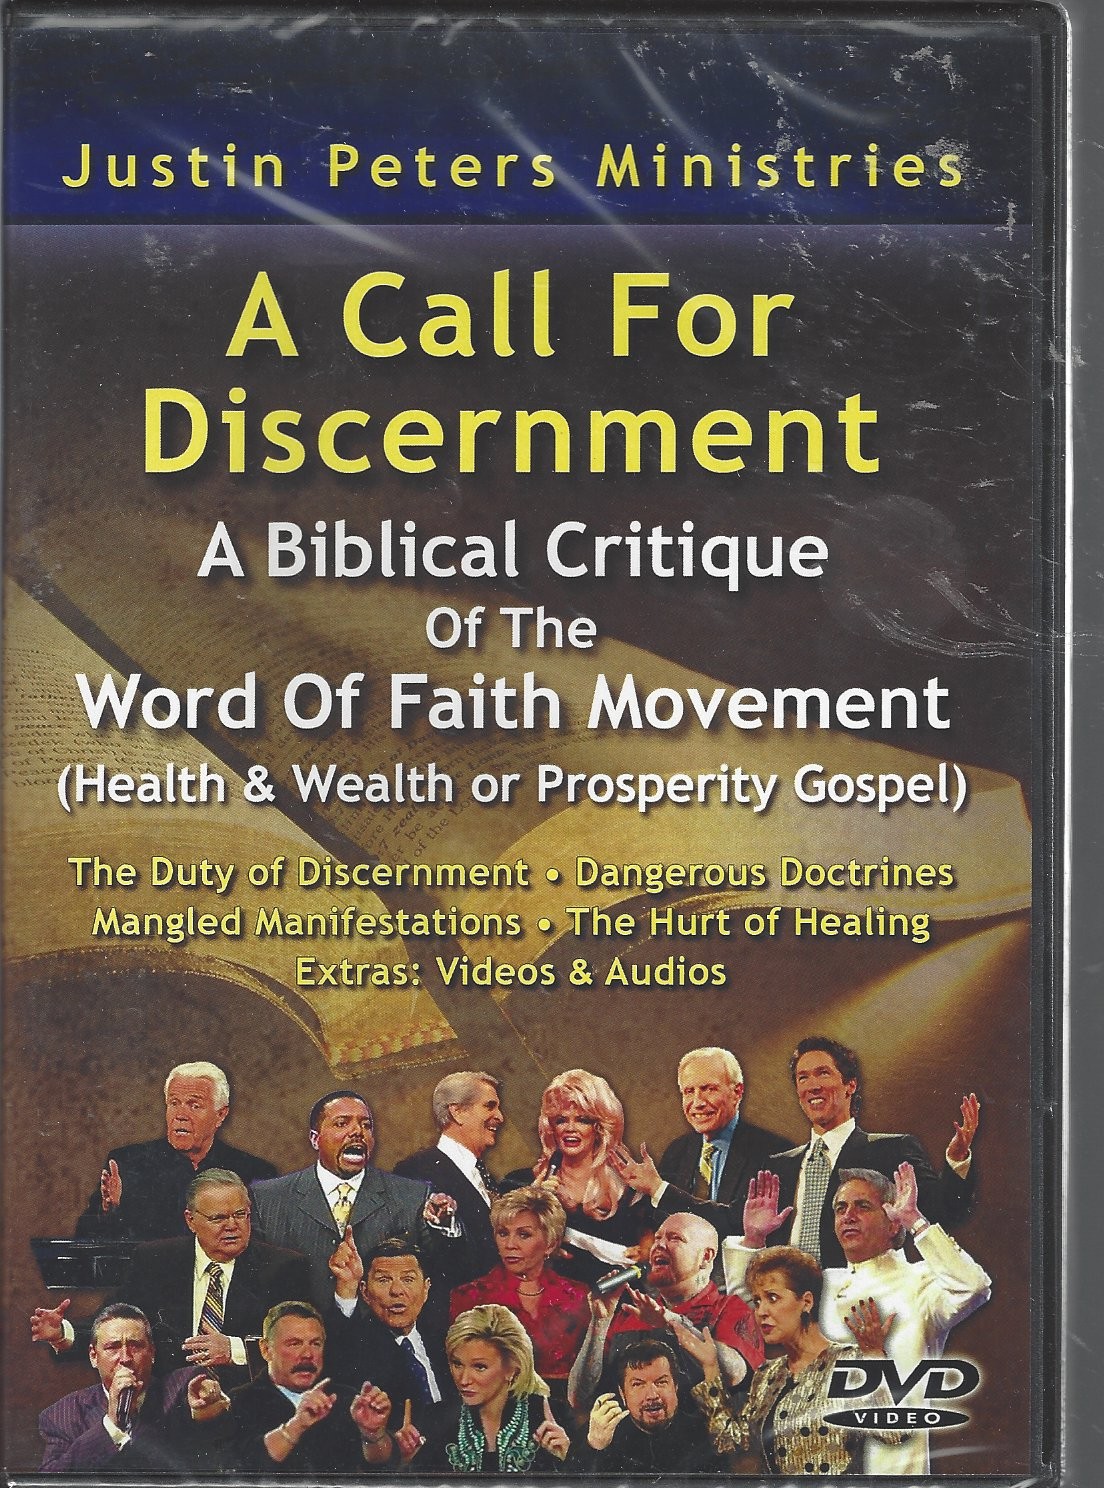 A Call For Discernment  A Biblical Critique Of The Word Of Faith Movement  (2010)  Front